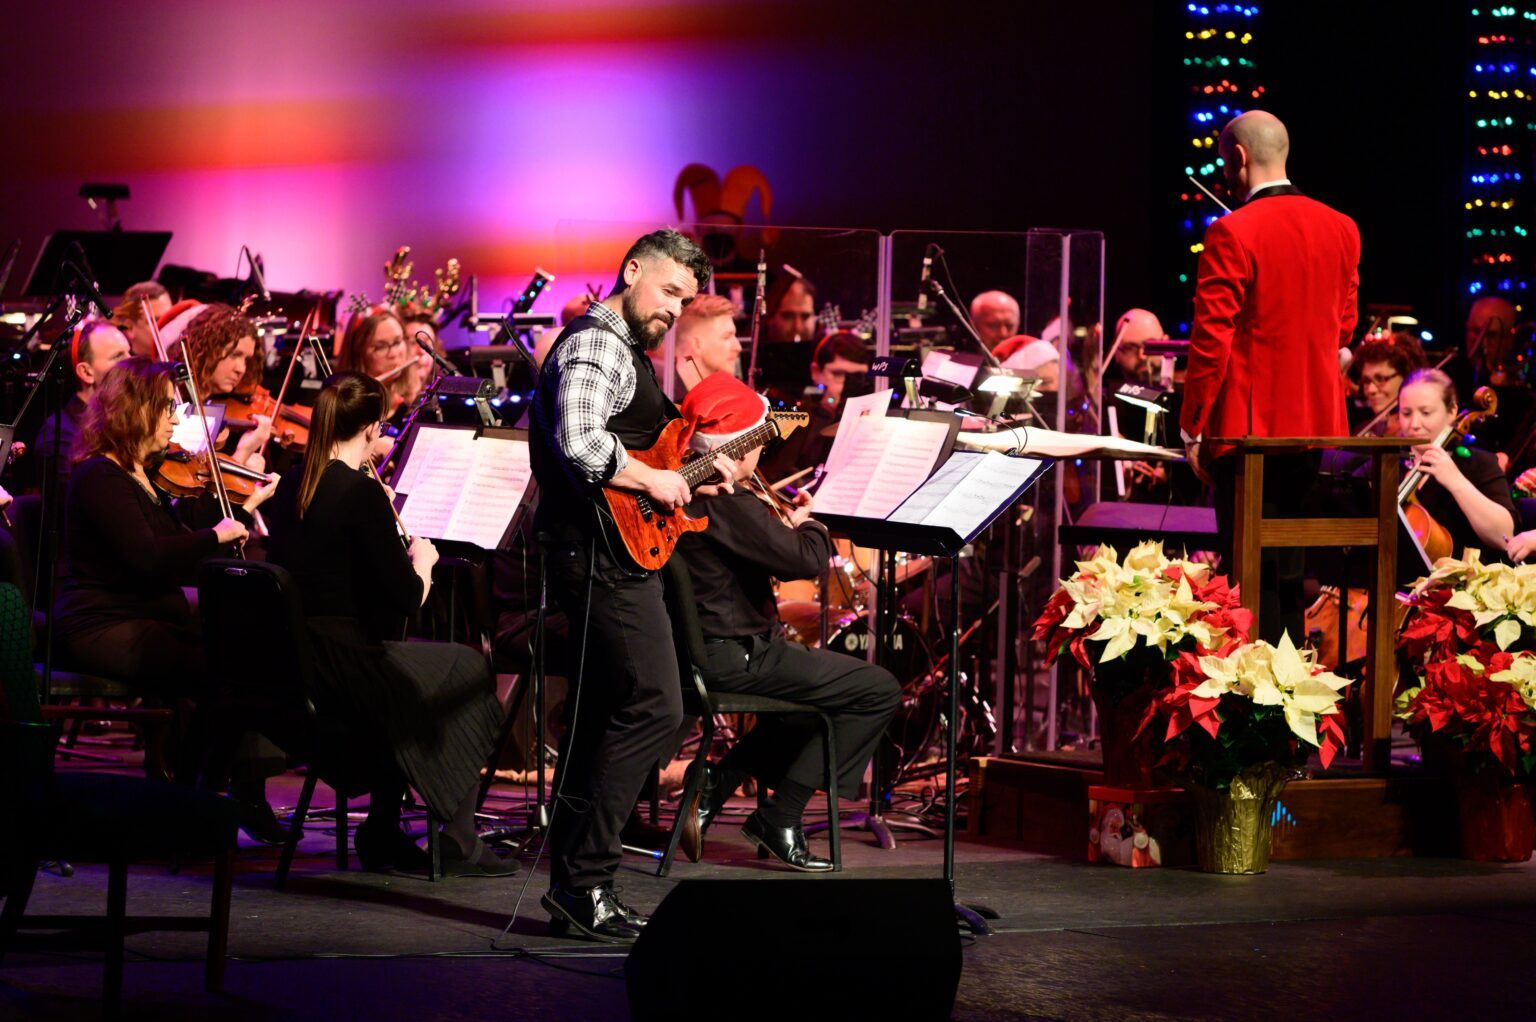 An electric guitar player in front of the Western Piedmont Symphony at the J.E. Broyhill Civic Center at the 2022 Holiday Pops concert